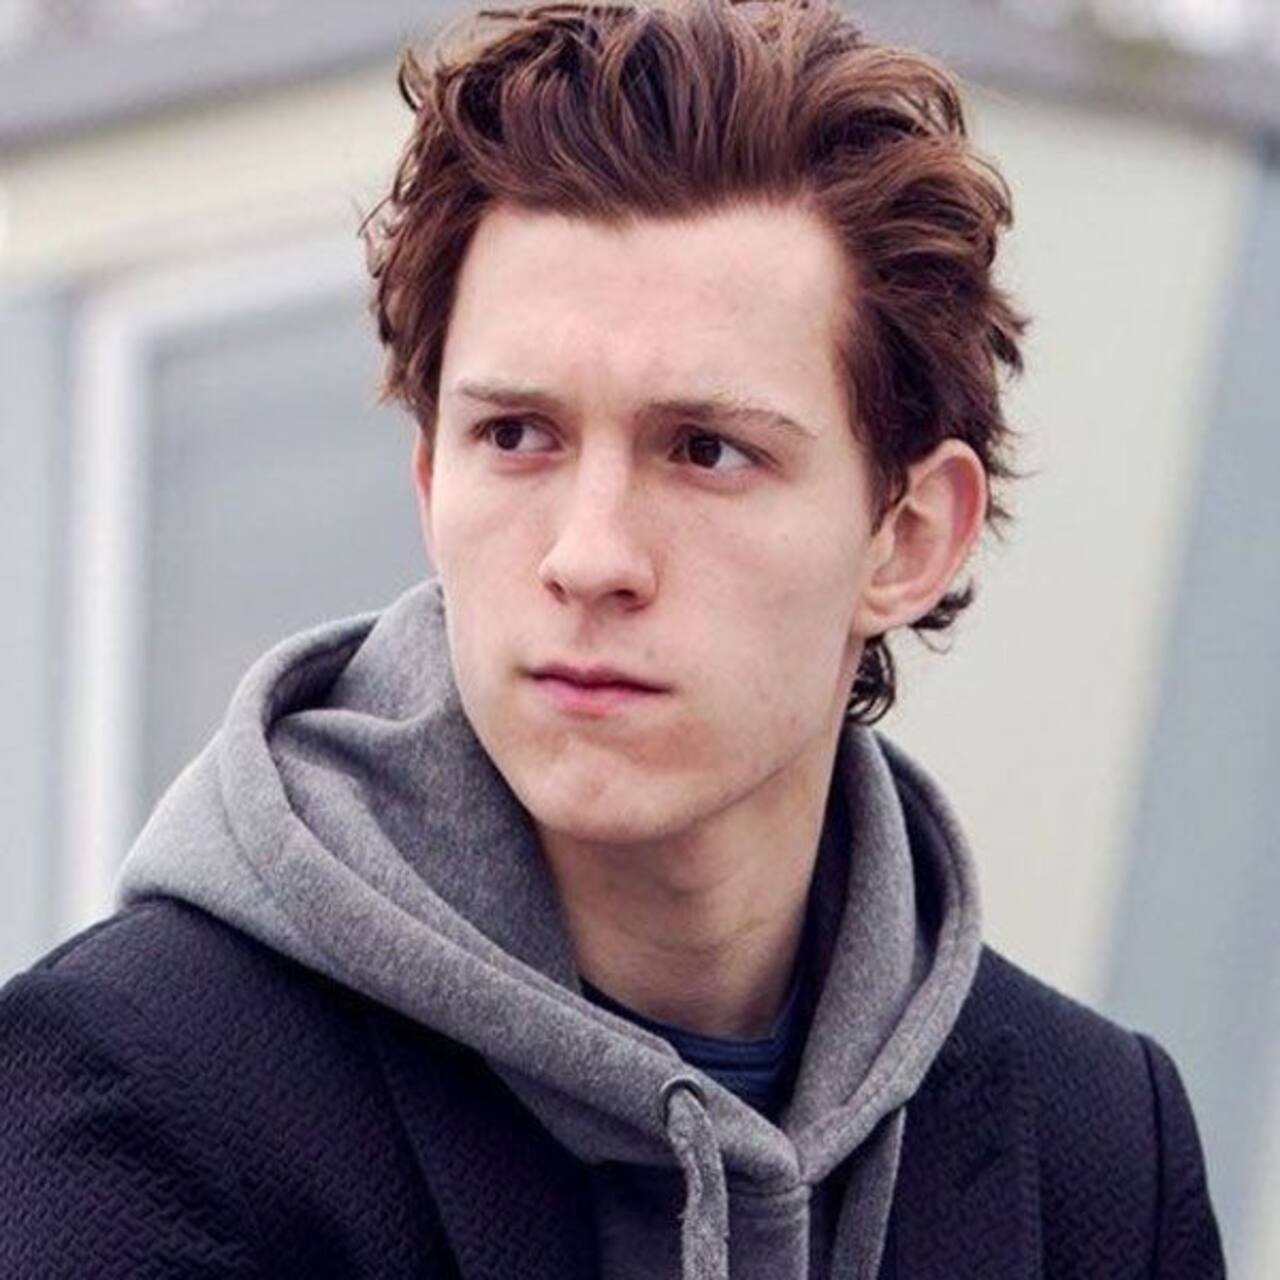 Tom Holland aka Spider-Man breaks up with Olivia, his childhood friend